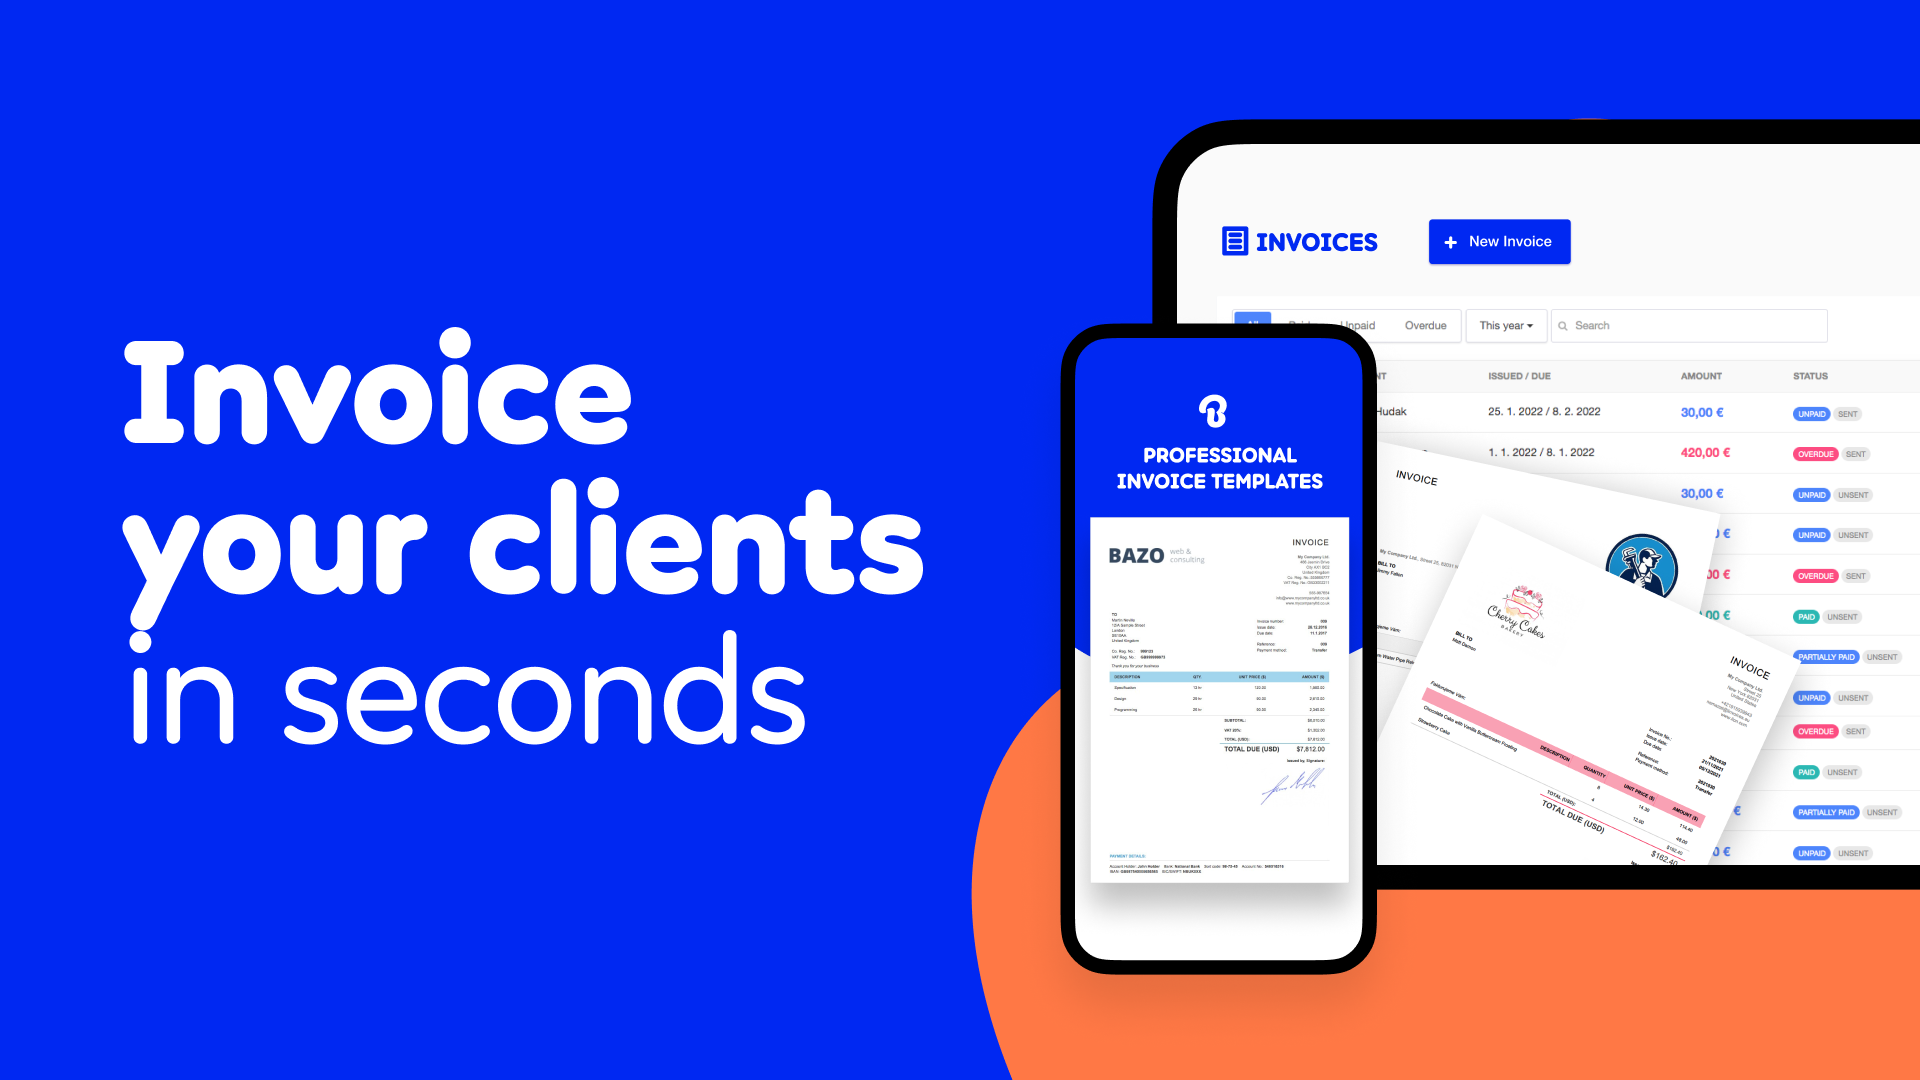 Invoice your customers in seconds.